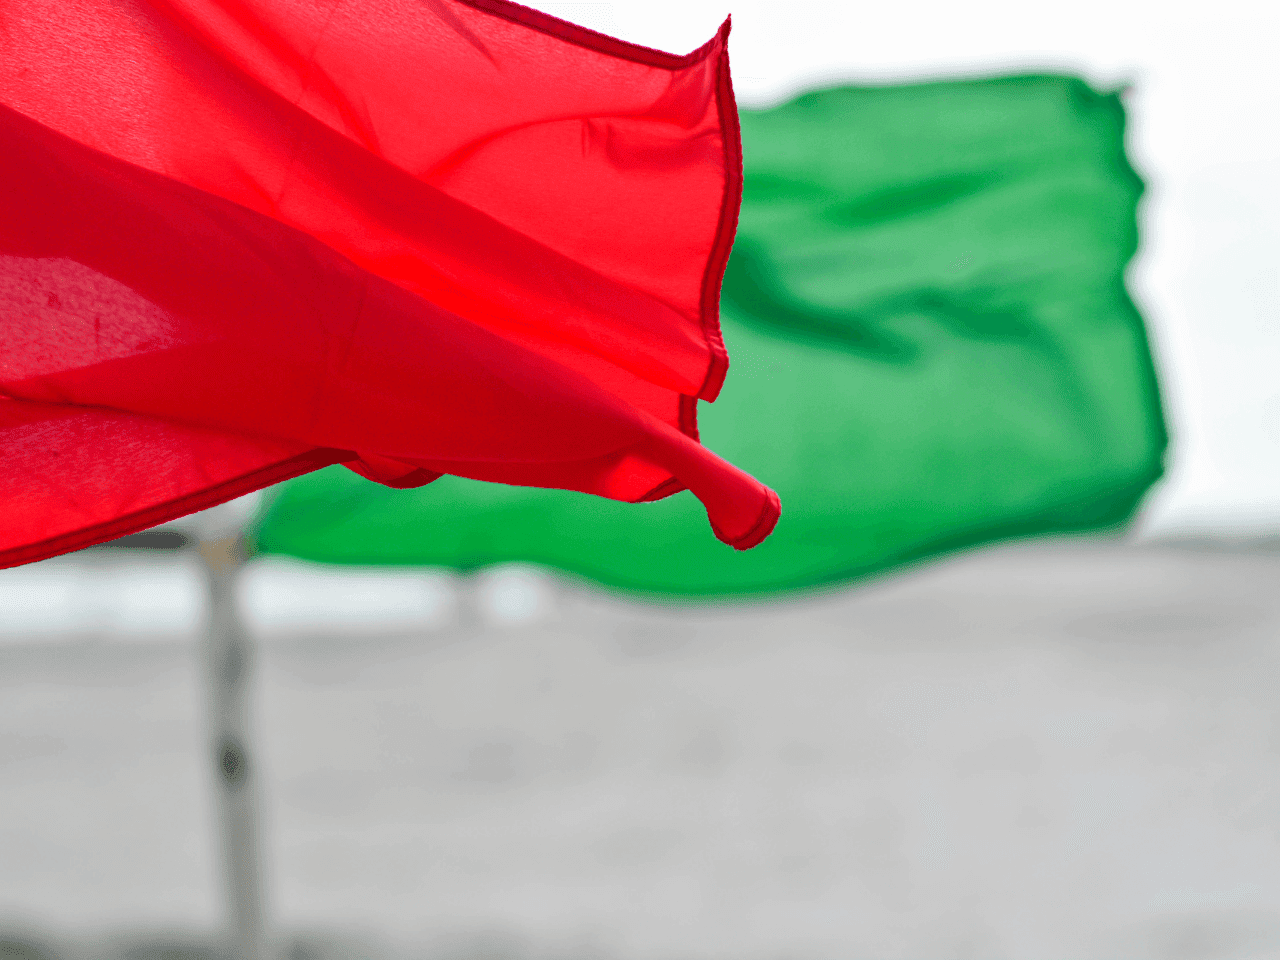 Red & Green Flags – How to Spot a Good Career Opportunity